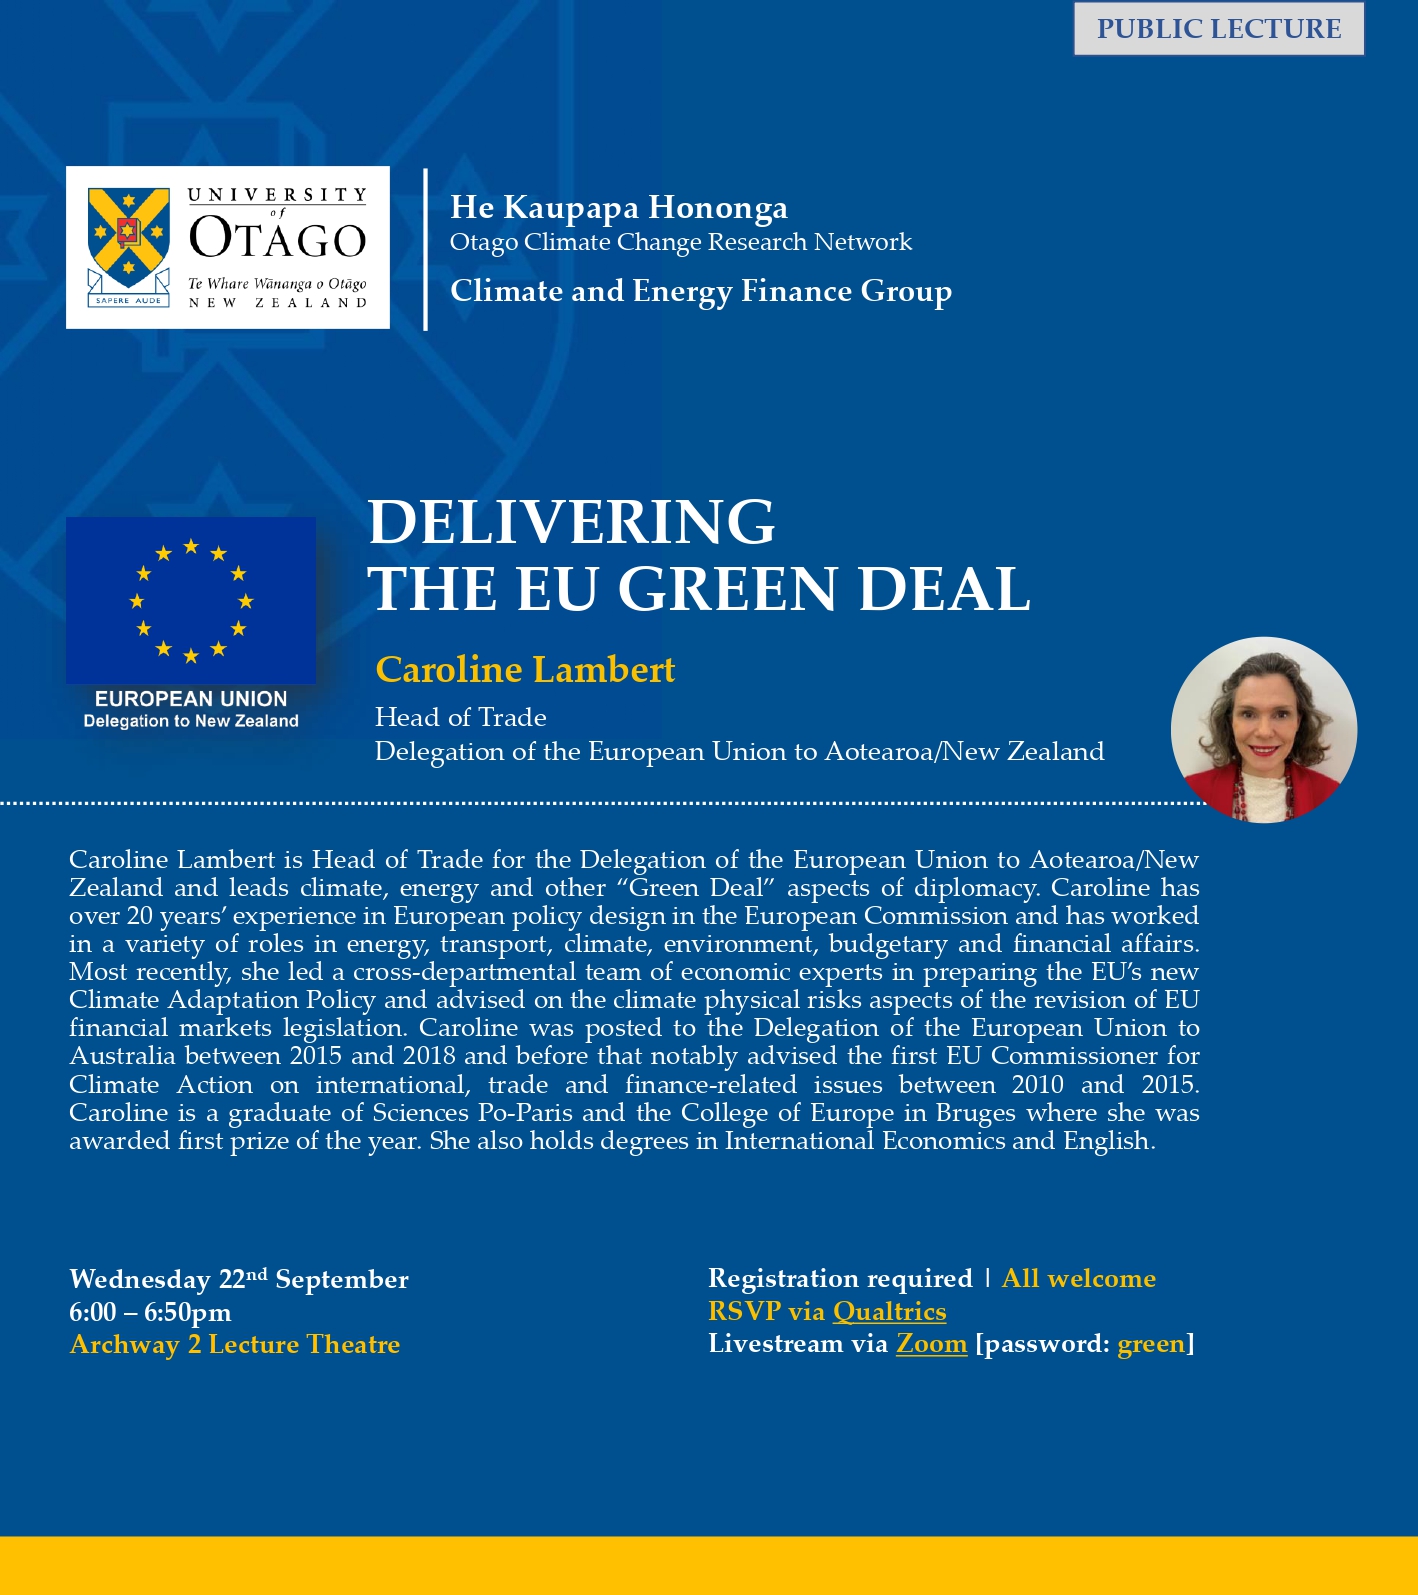 CEFGroup & HKH Joint Public Lecture | Delivering the EU Green Deal @ Archway 2 Lecture Theatre